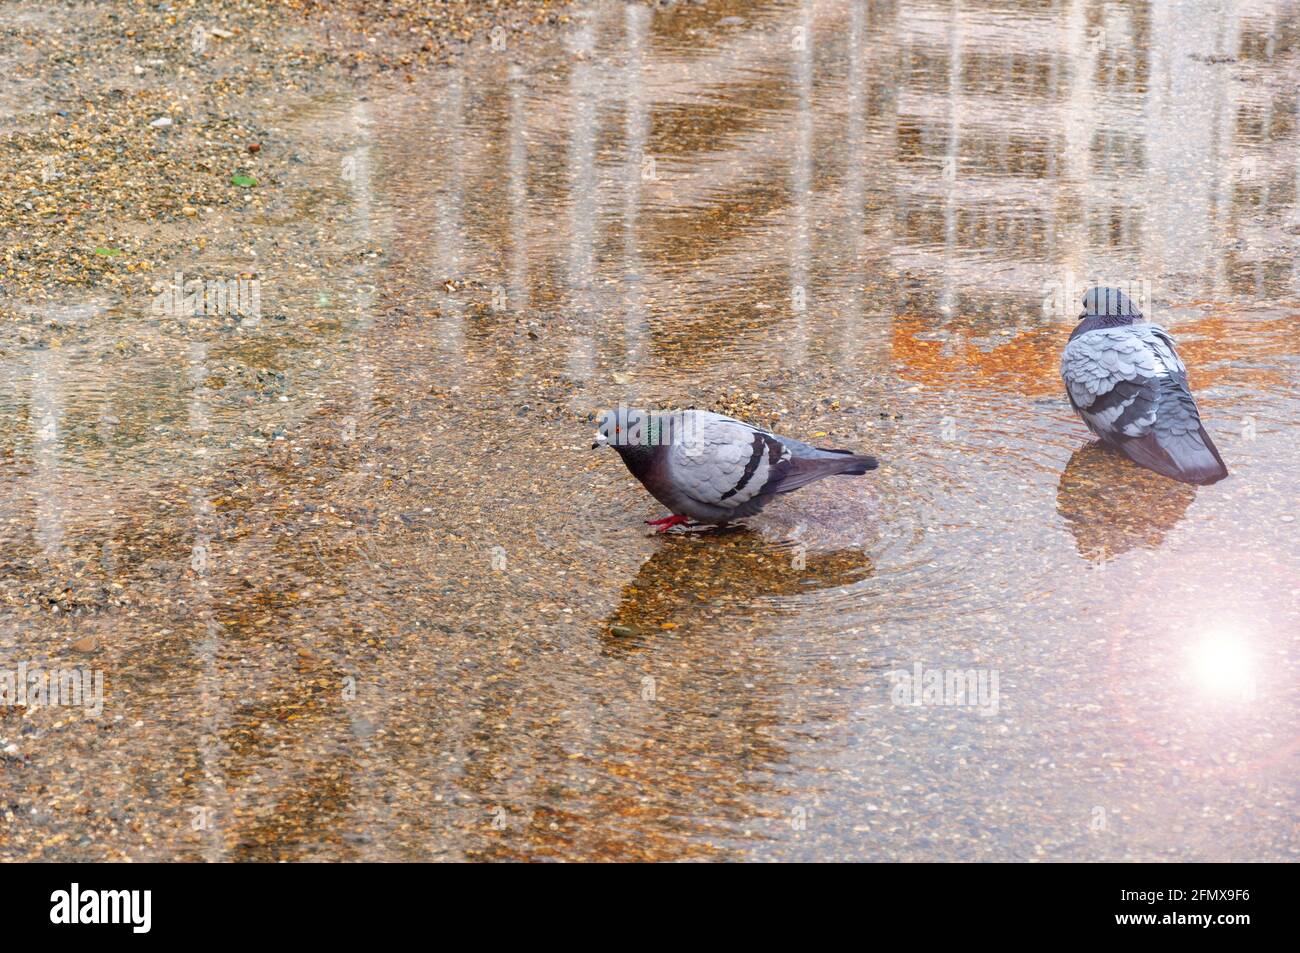 Two wild pigeons bathe in a puddle on a sunny day. High Angle View Of Pigeons Perching On Puddle Stock Photo